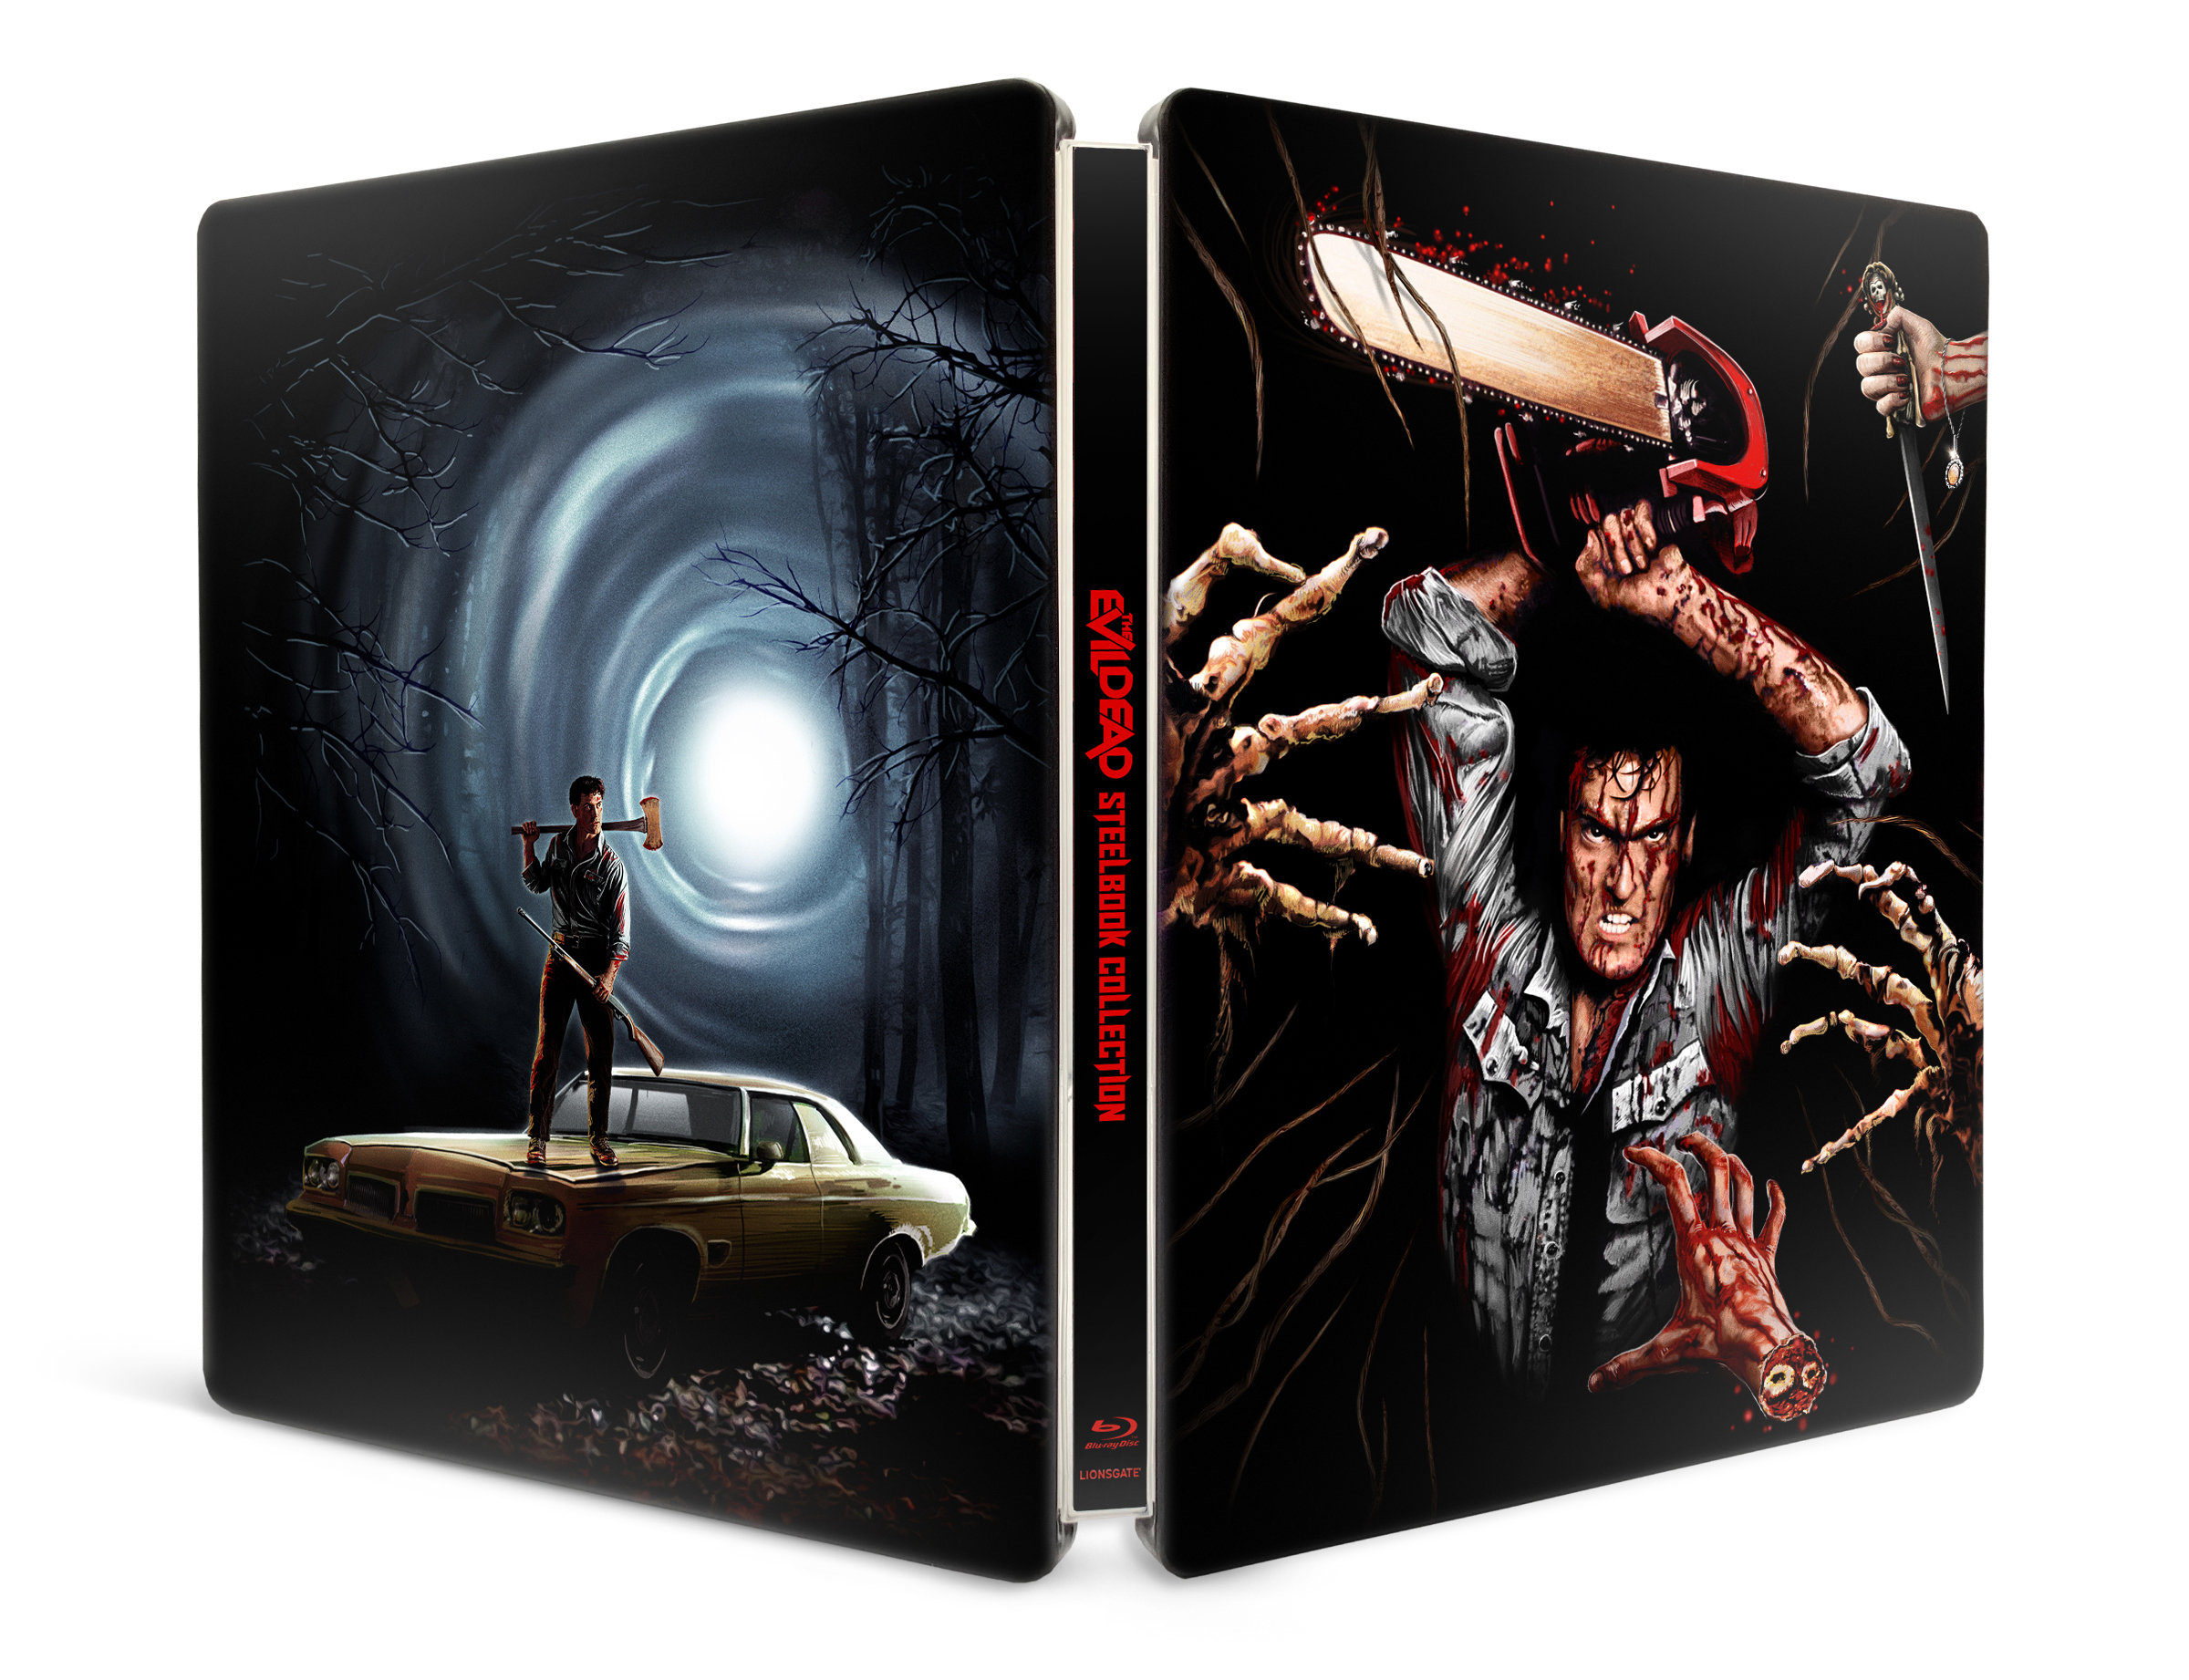 Evil Dead 1 and 2 [Blu-ray] - Best Buy